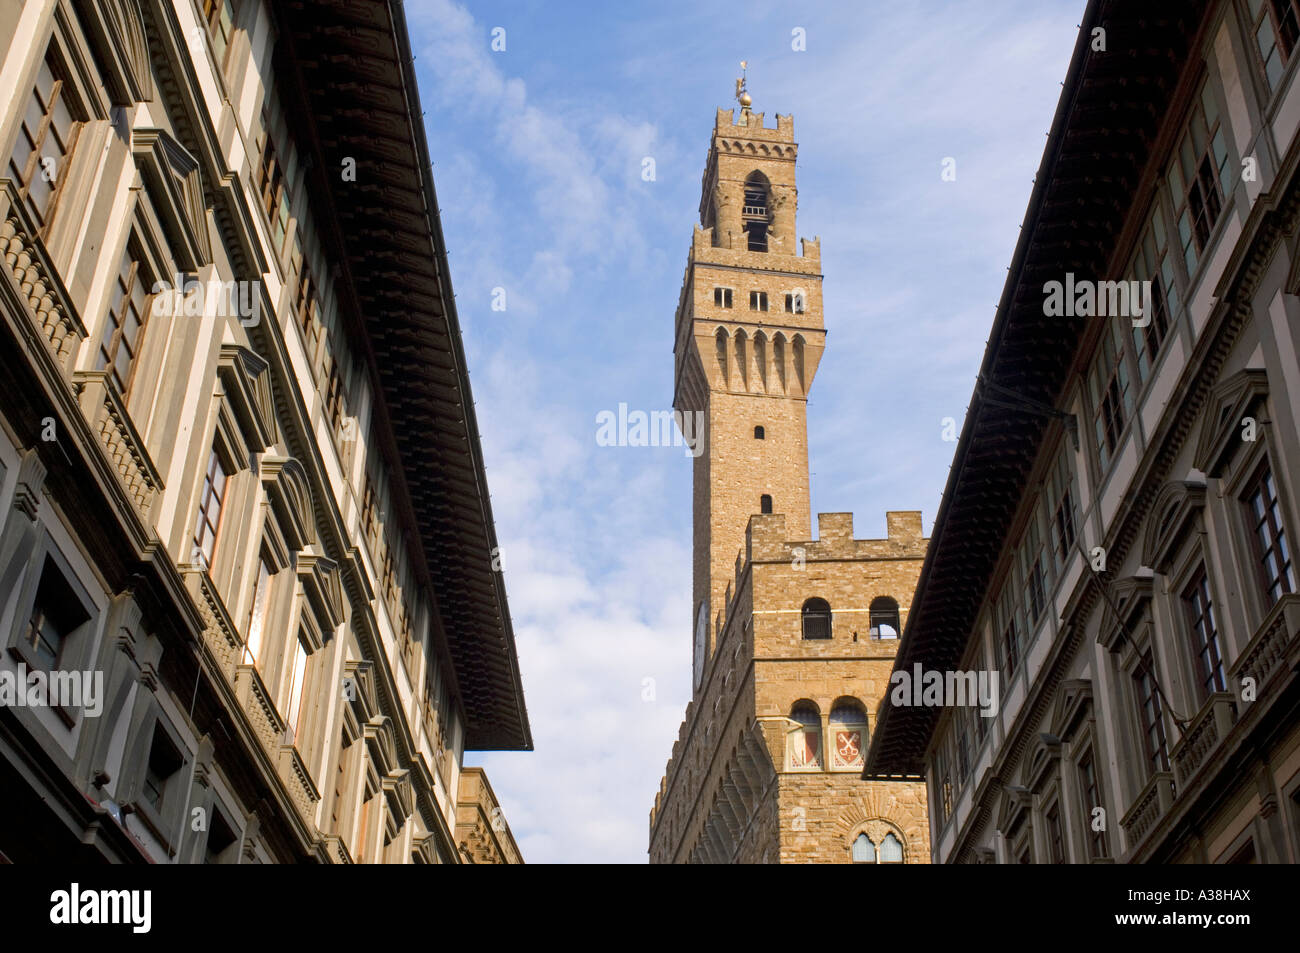 A wide angle view of the Palazzo Vecchio in Florence 'surrounded' by the two wings of the Uffizi Gallery. Stock Photo